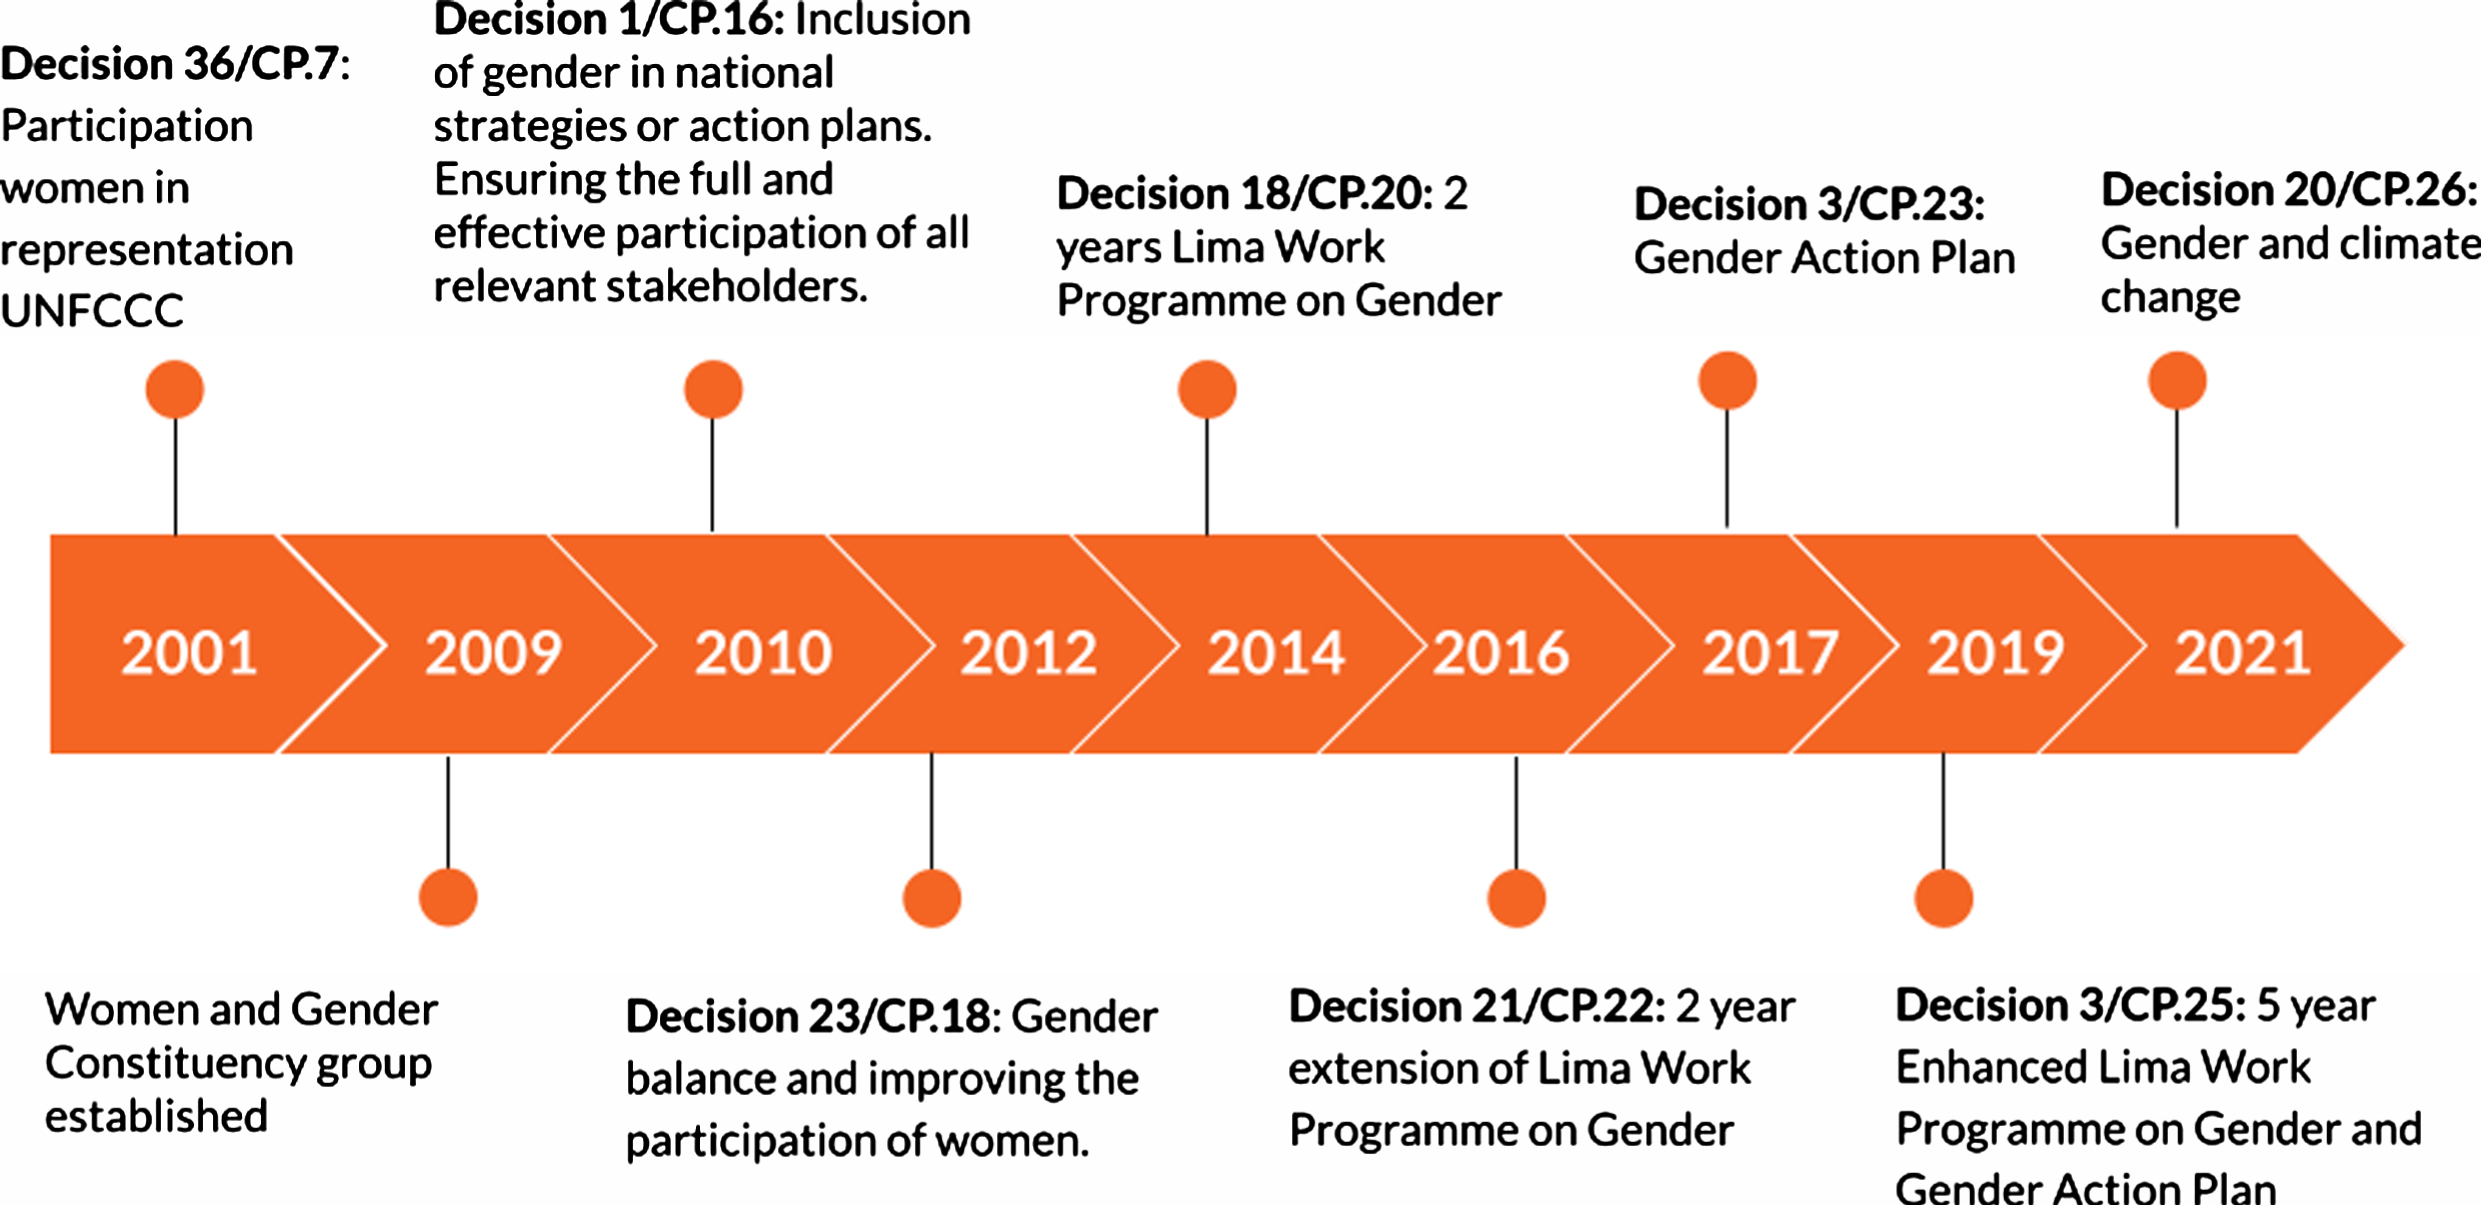 The History of Gender in the United Nations Framework Convention on Climate Change.